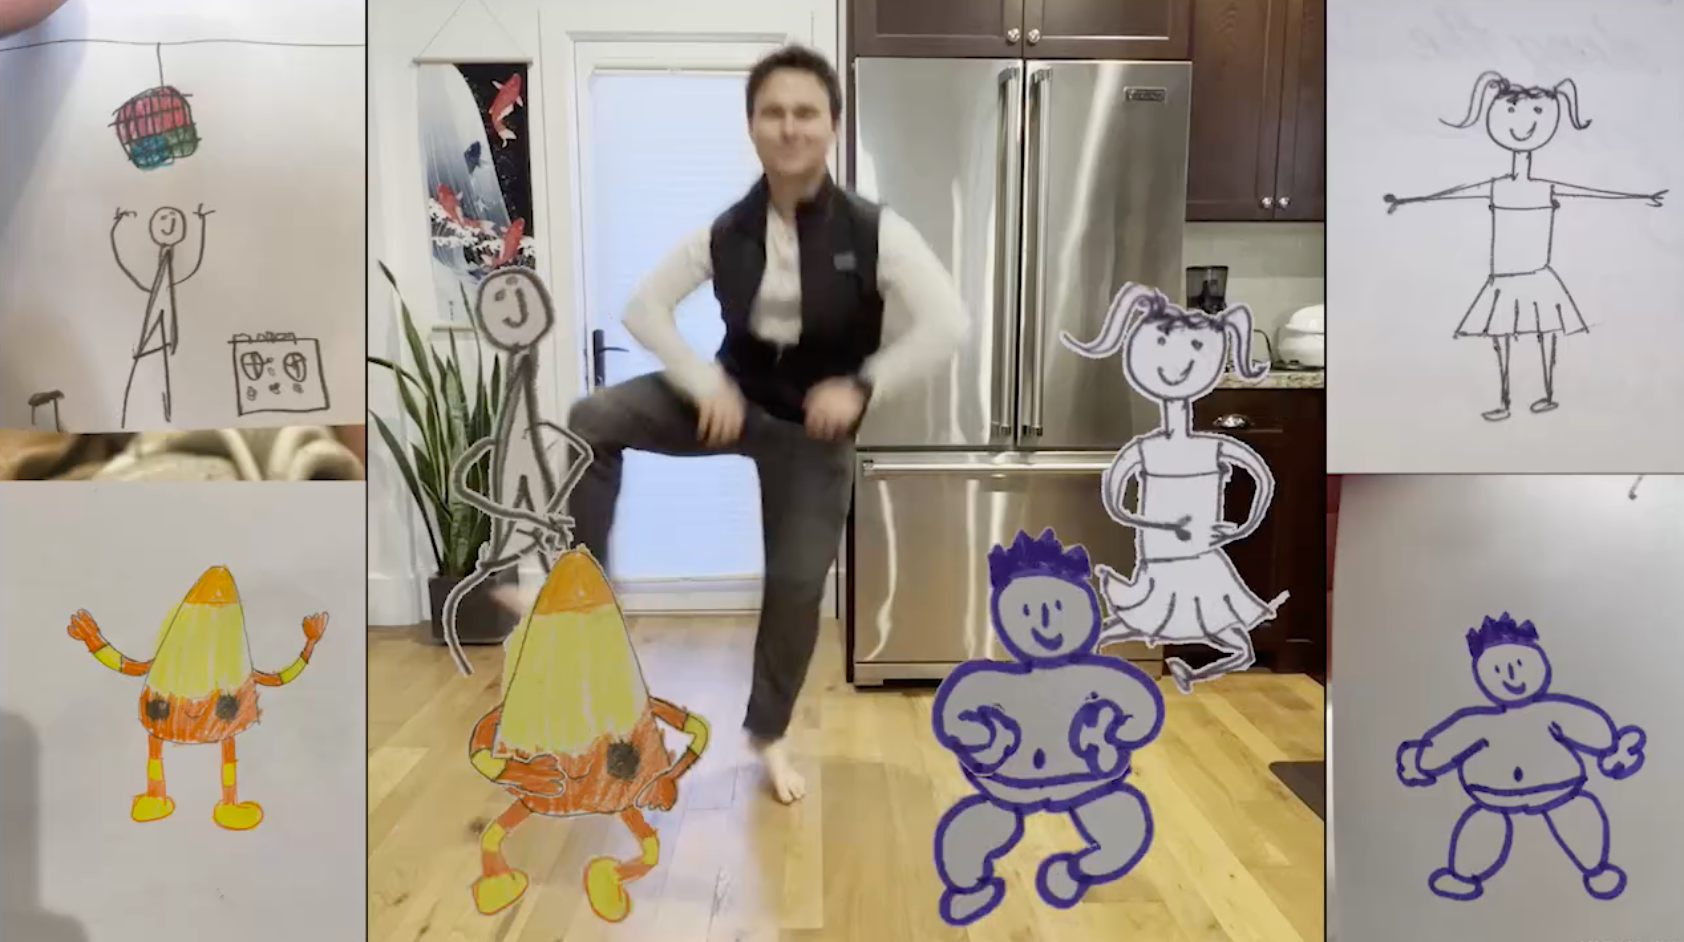 A man dancing next to animated drawings.